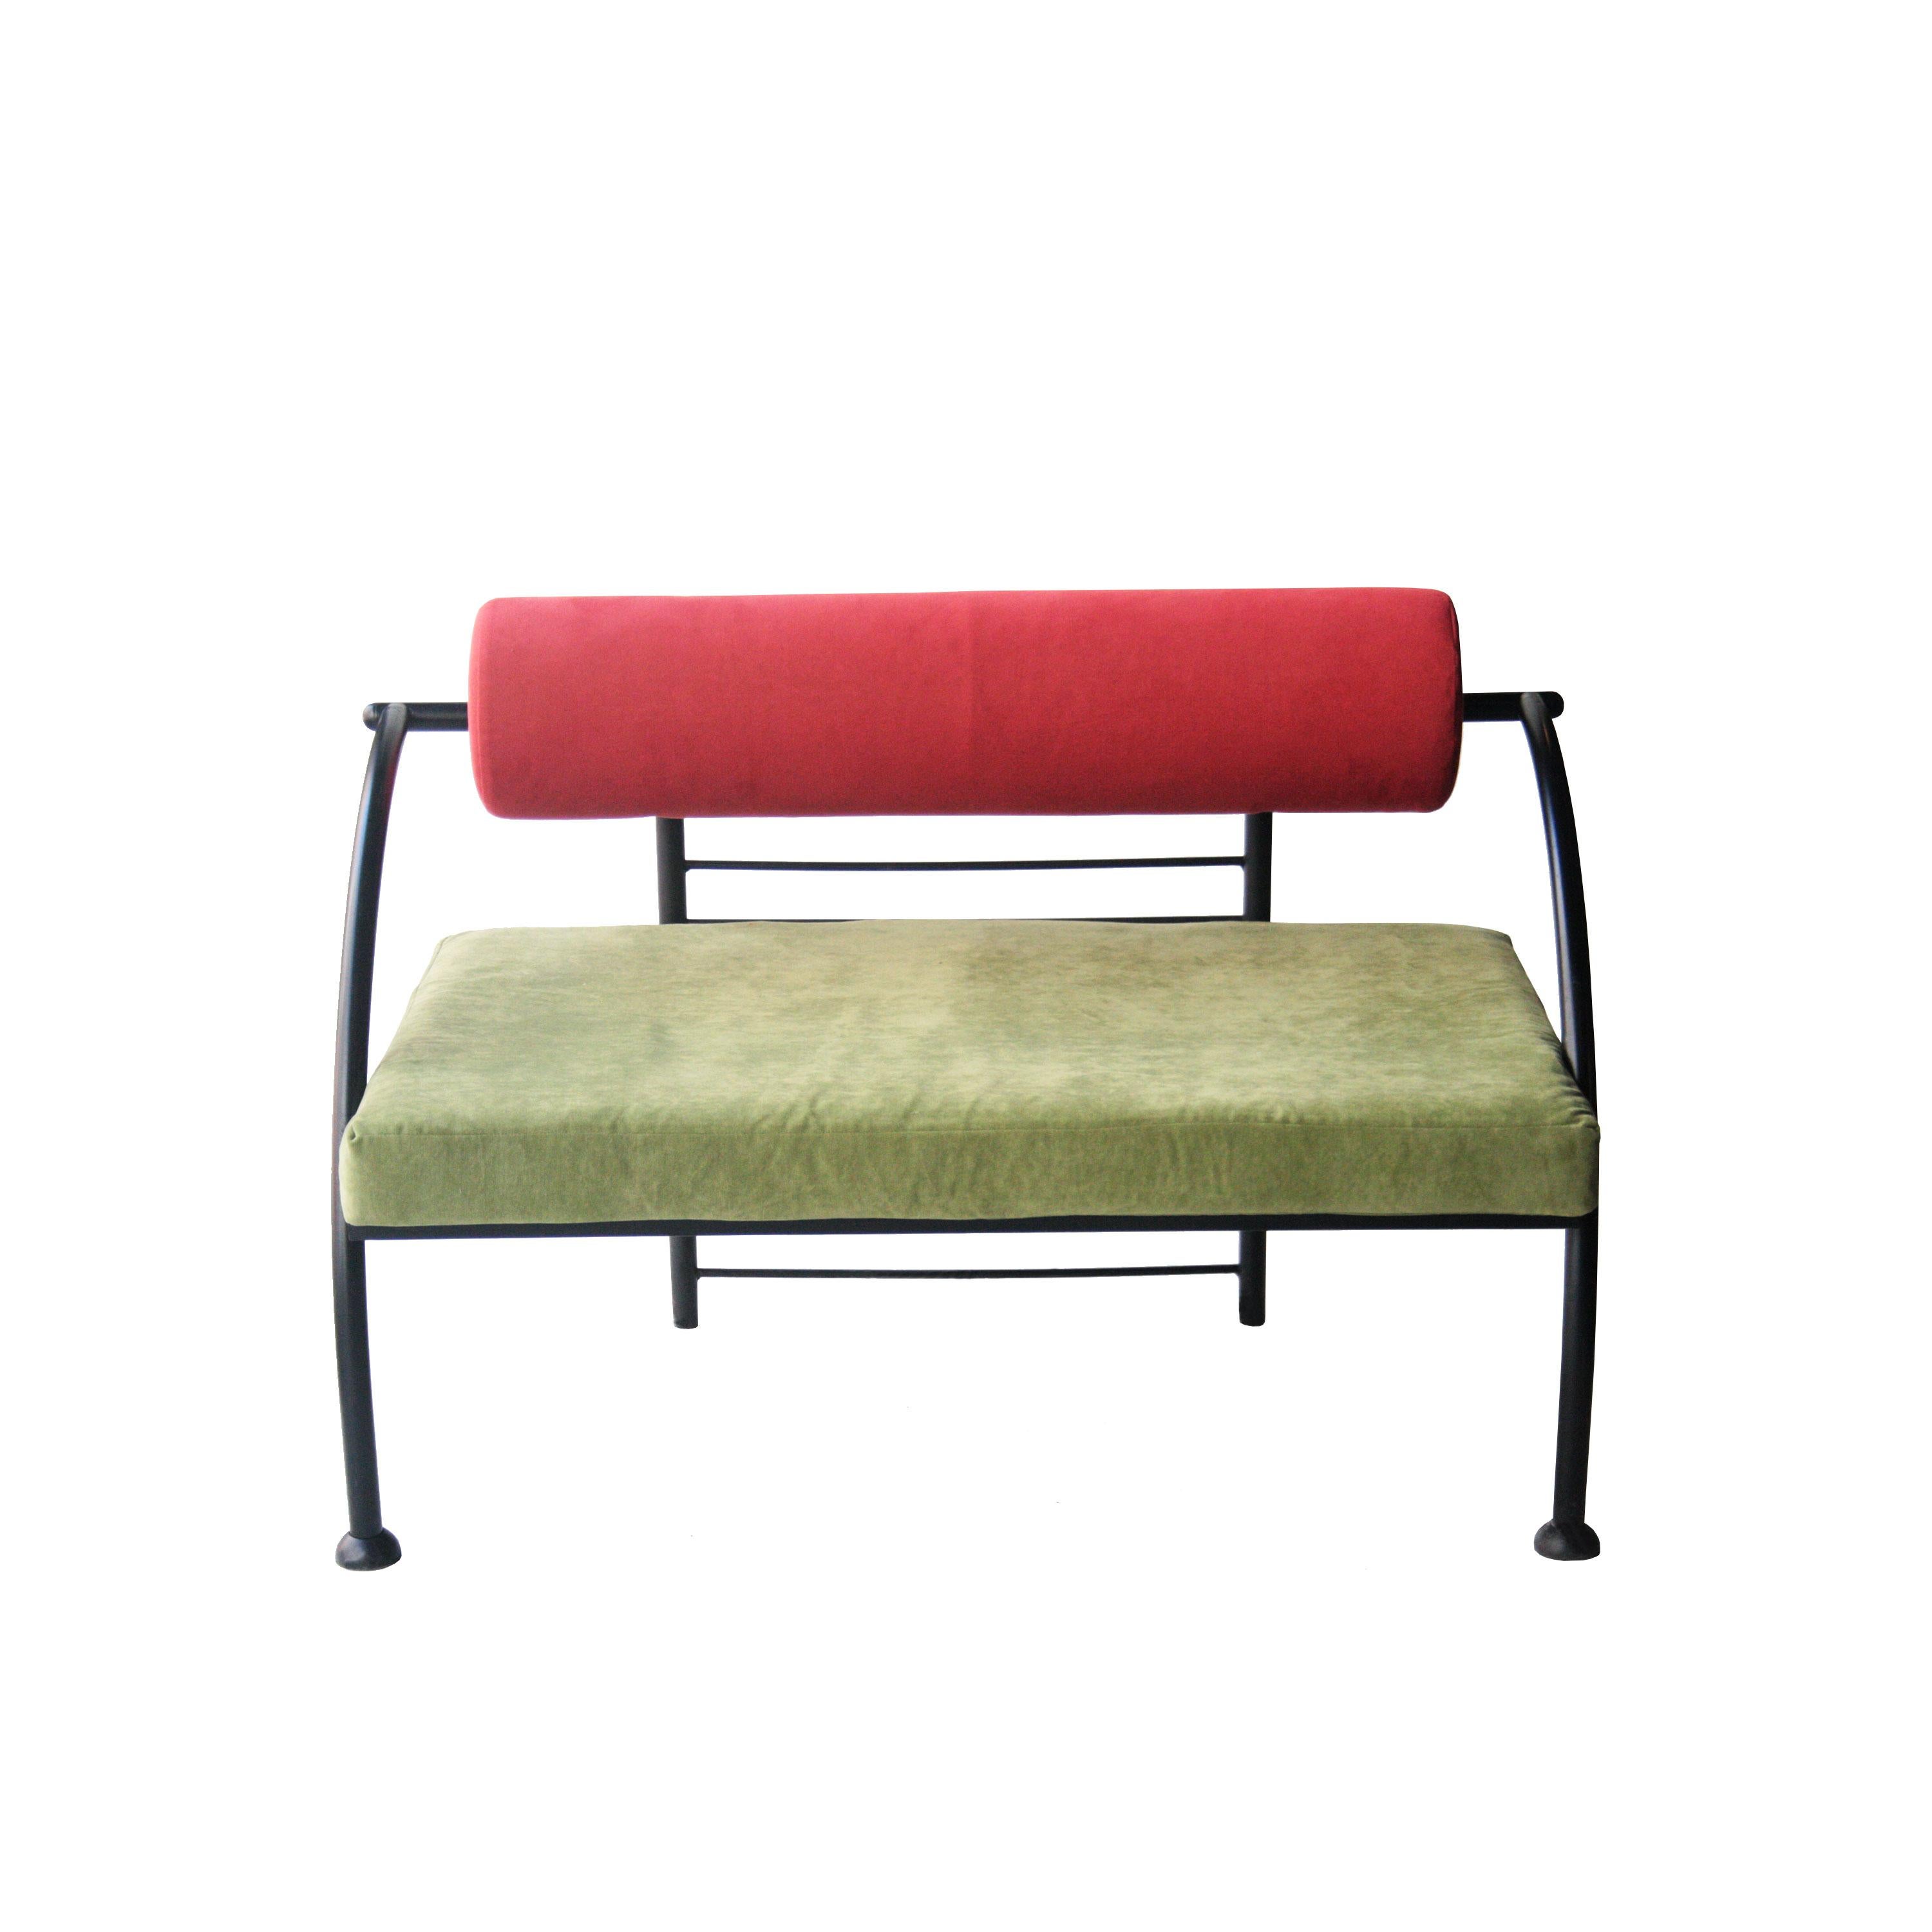 Lacquered Memphis Style Green Red Geometric Italian Seat Sofa, Italy, 1980